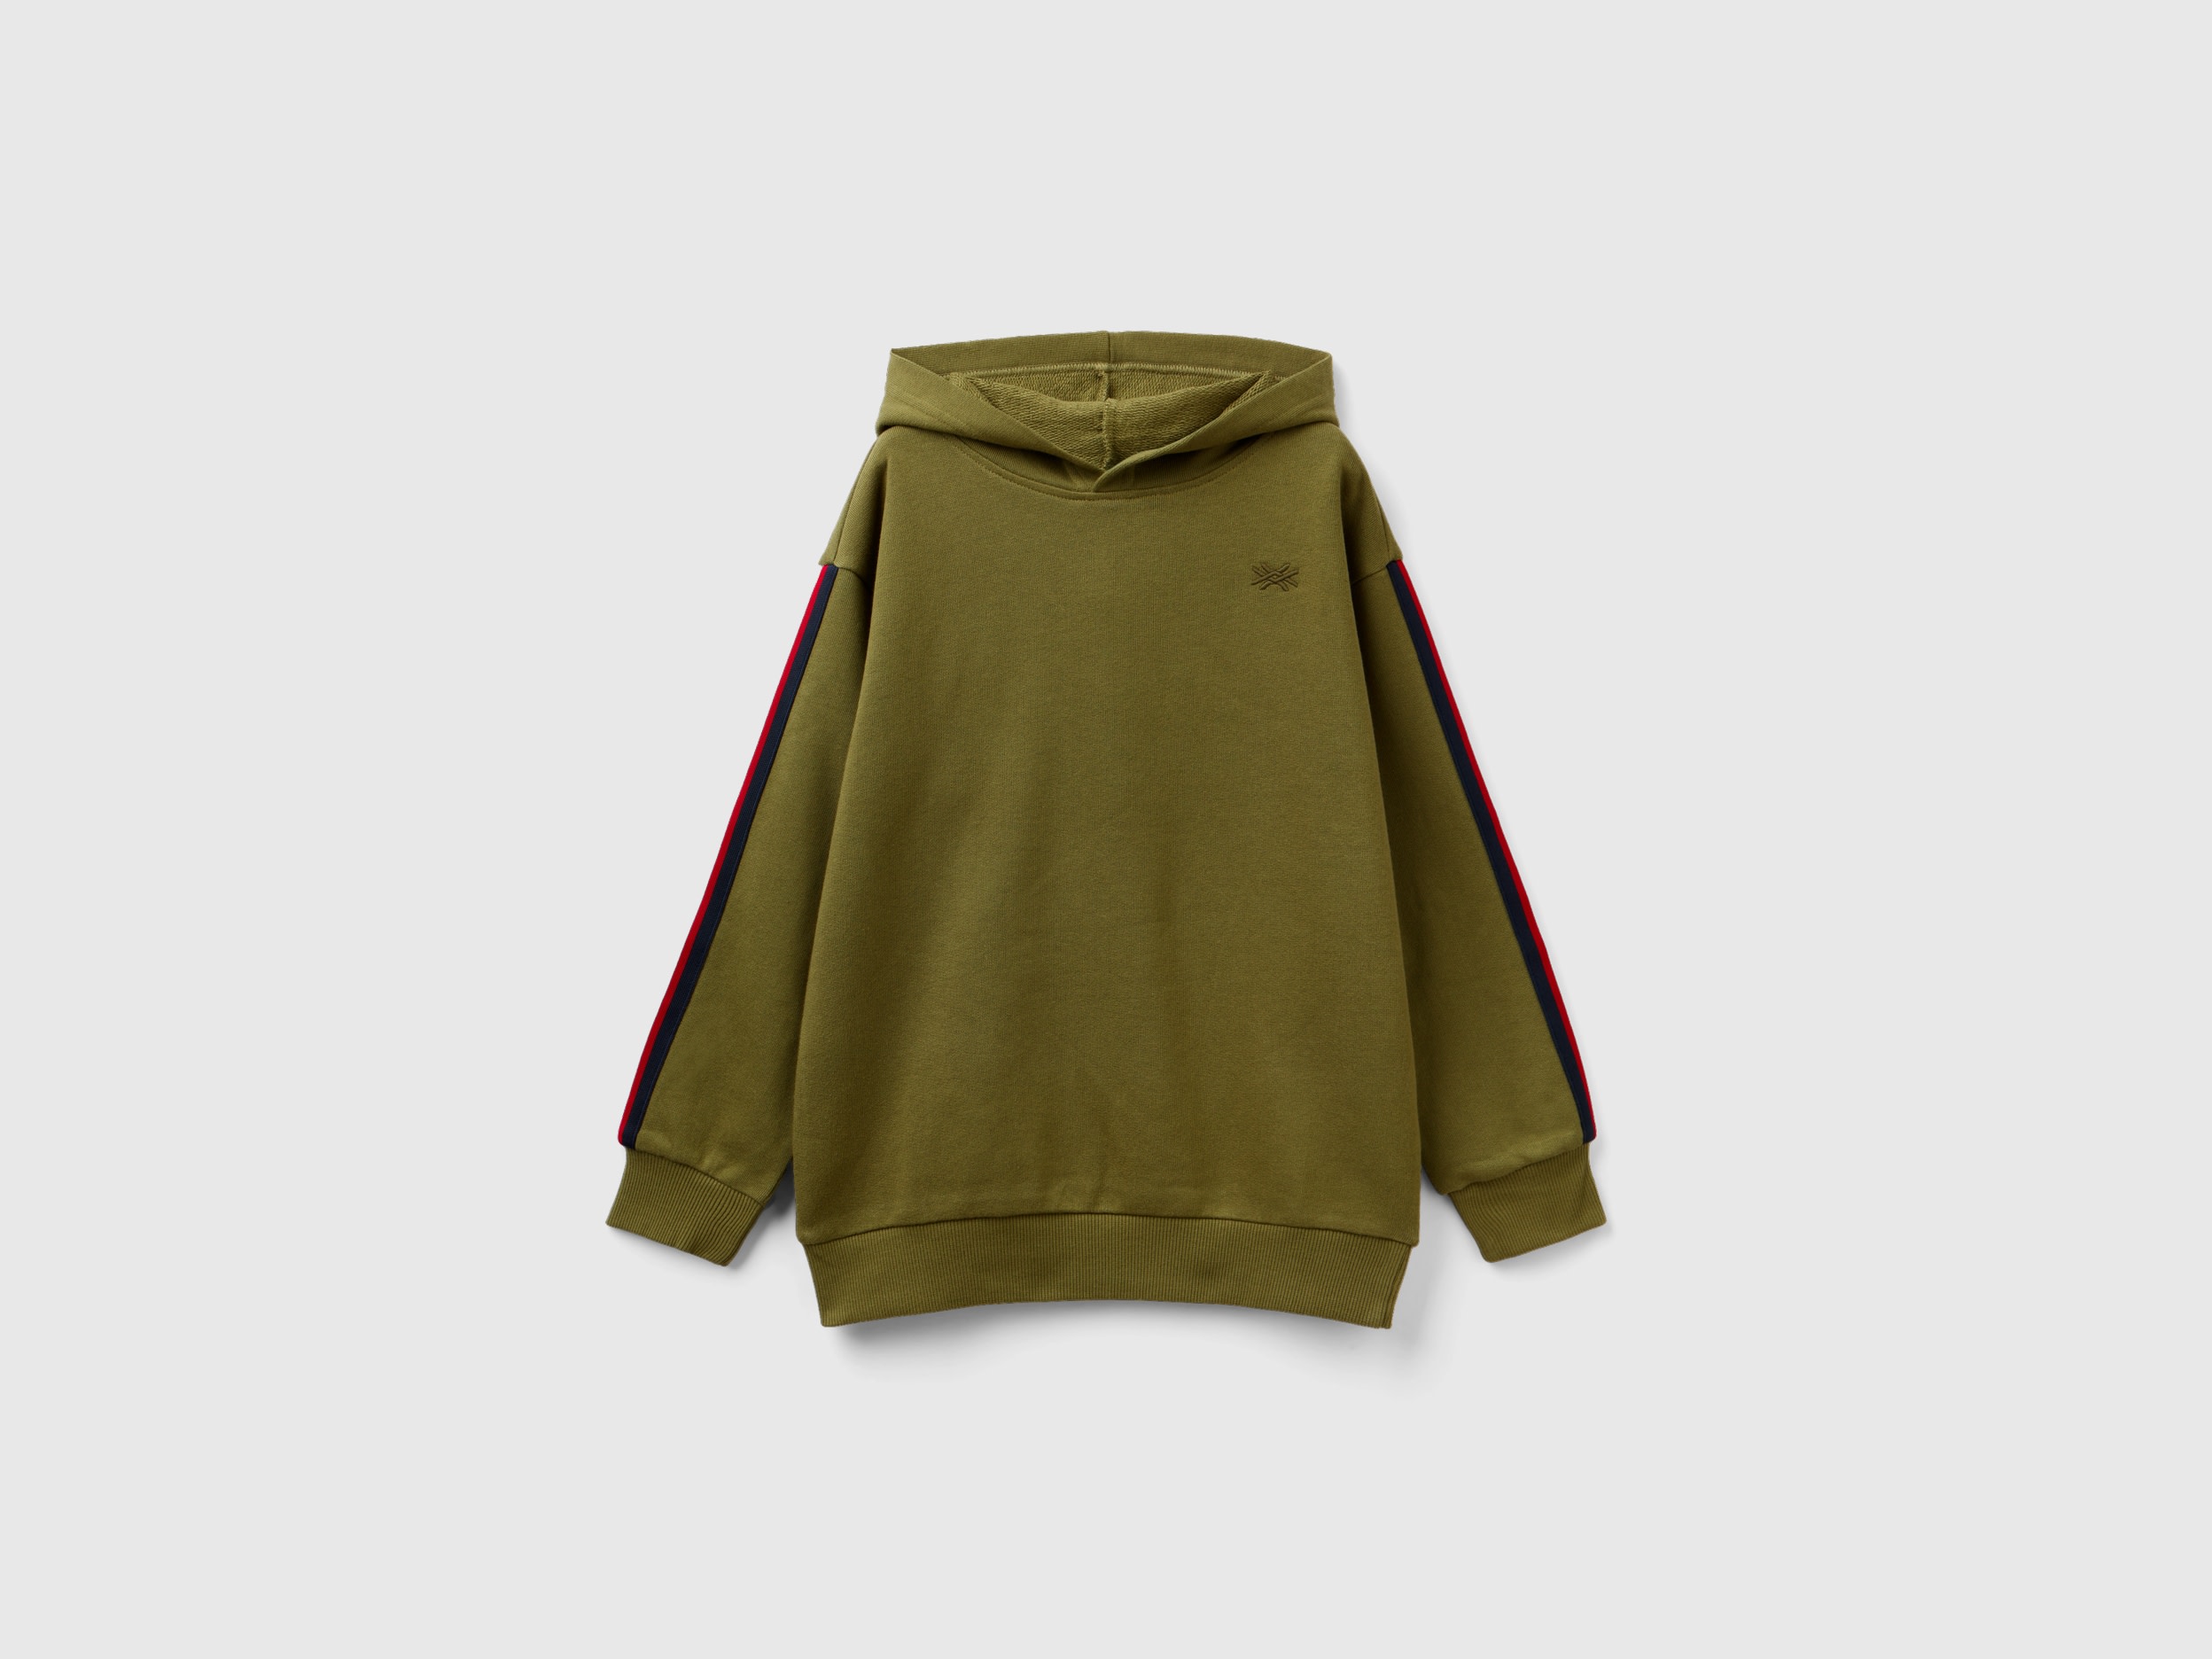 Benetton, Oversized Hoodie, size L, Military Green, Kids